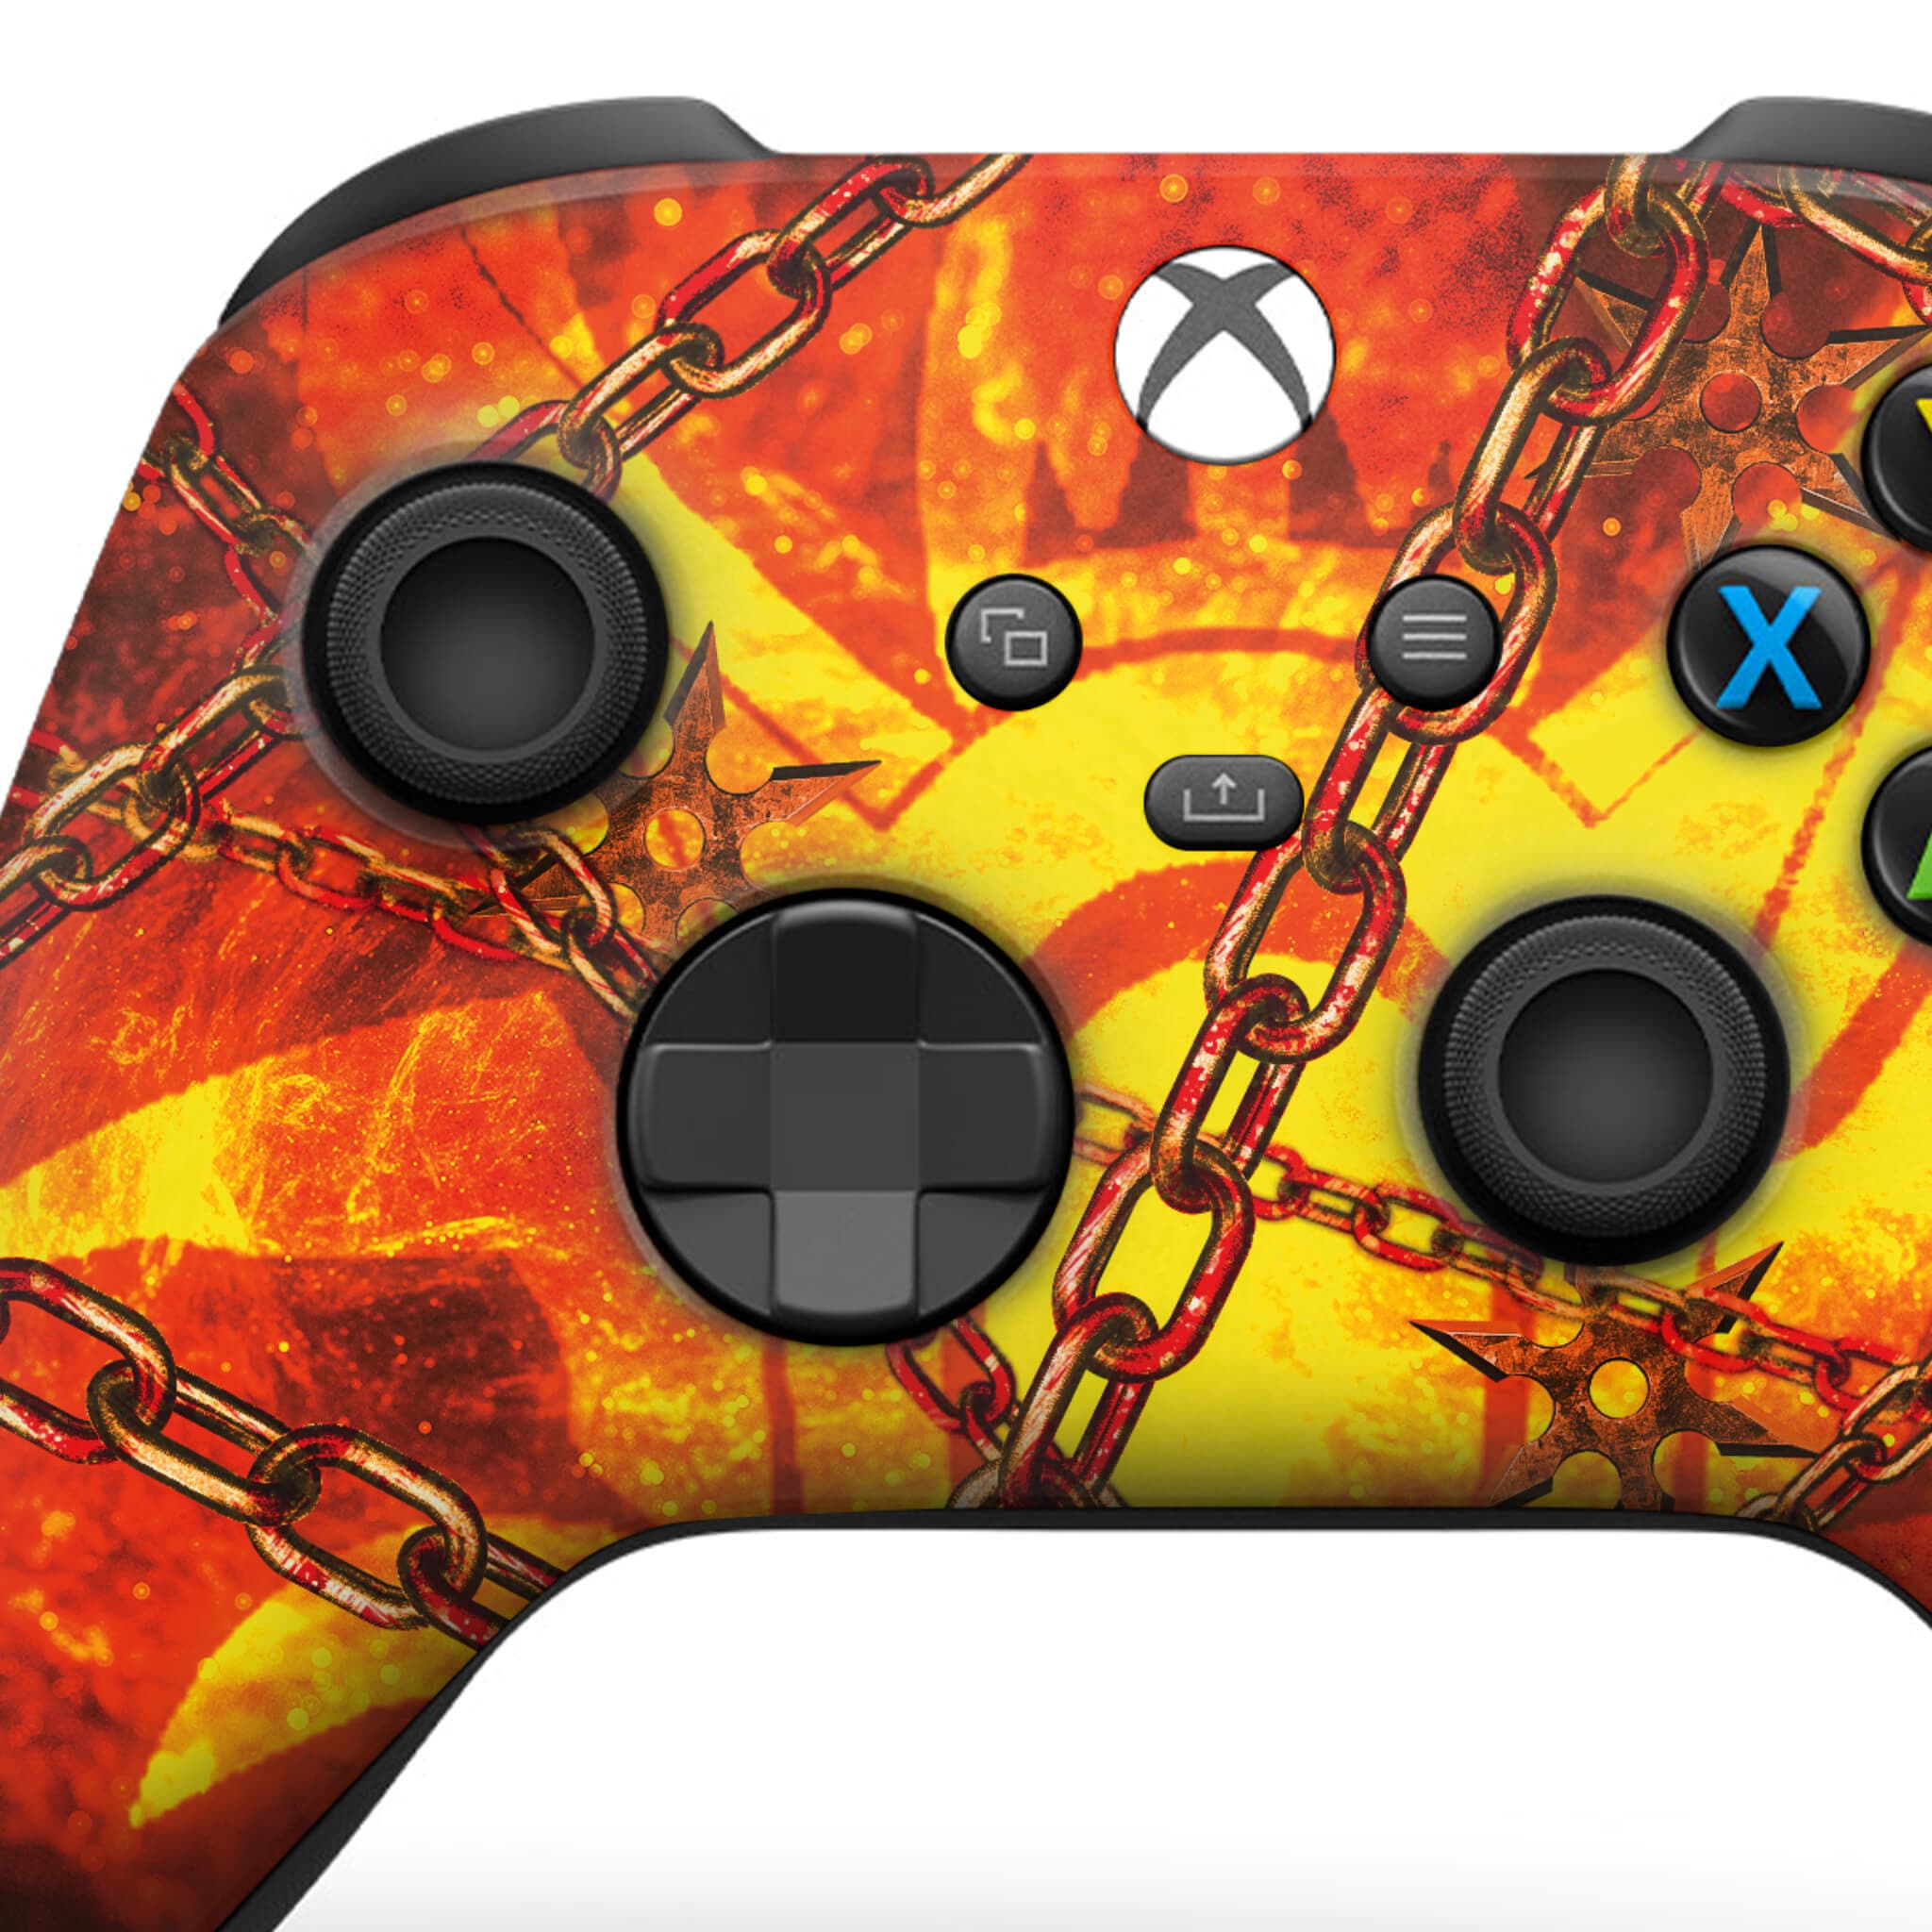 Hanzo Scorpion inspired x box series x controller with bullet buttons